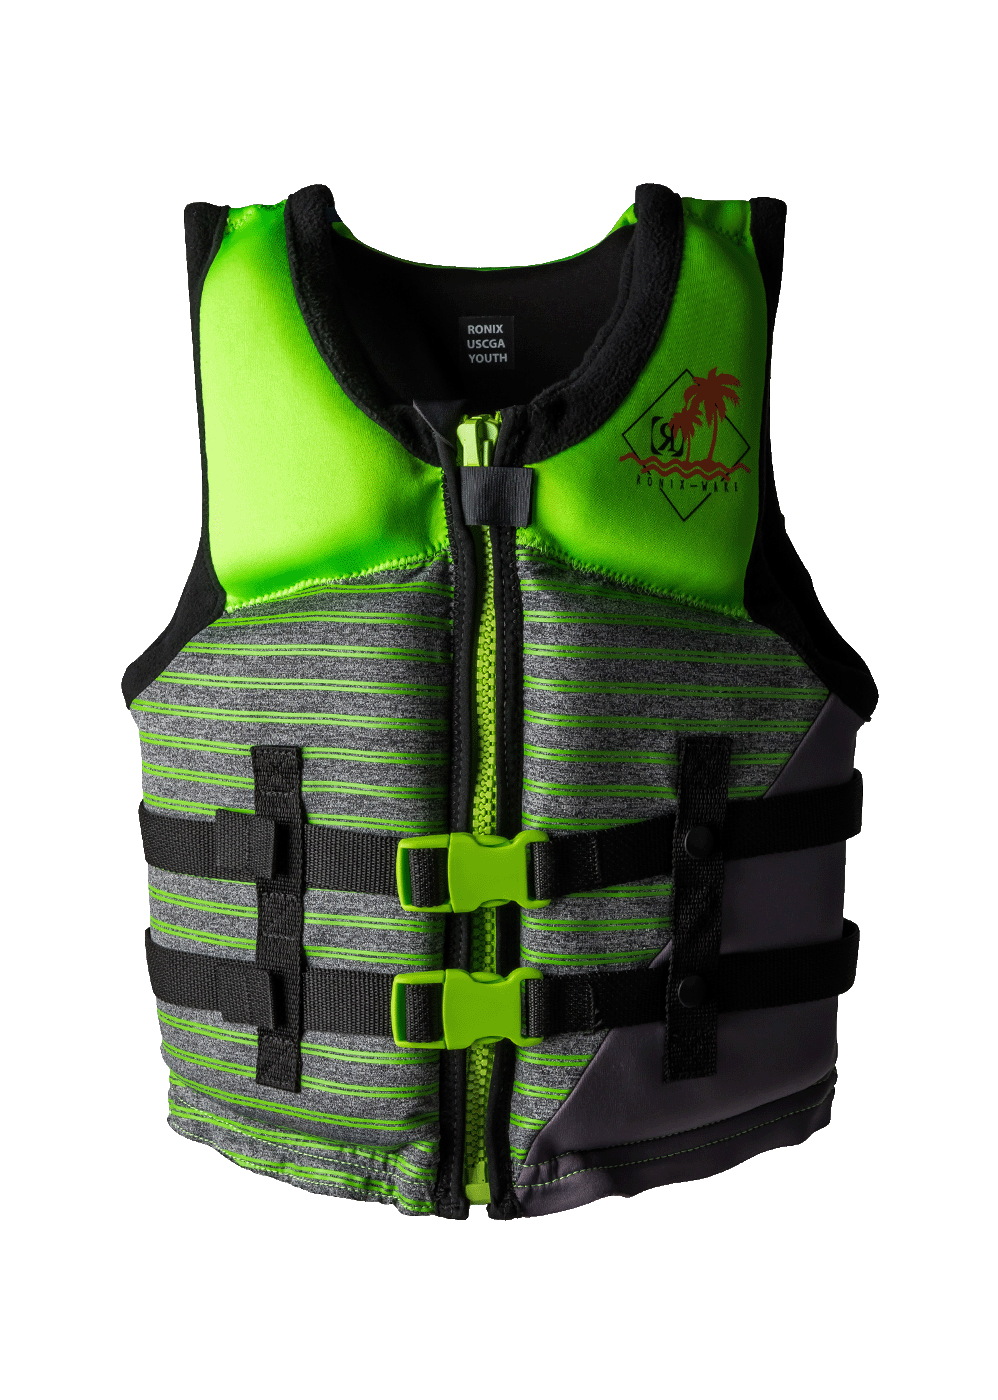 2022 Ronix Vests CGA Vision Youth Front copy